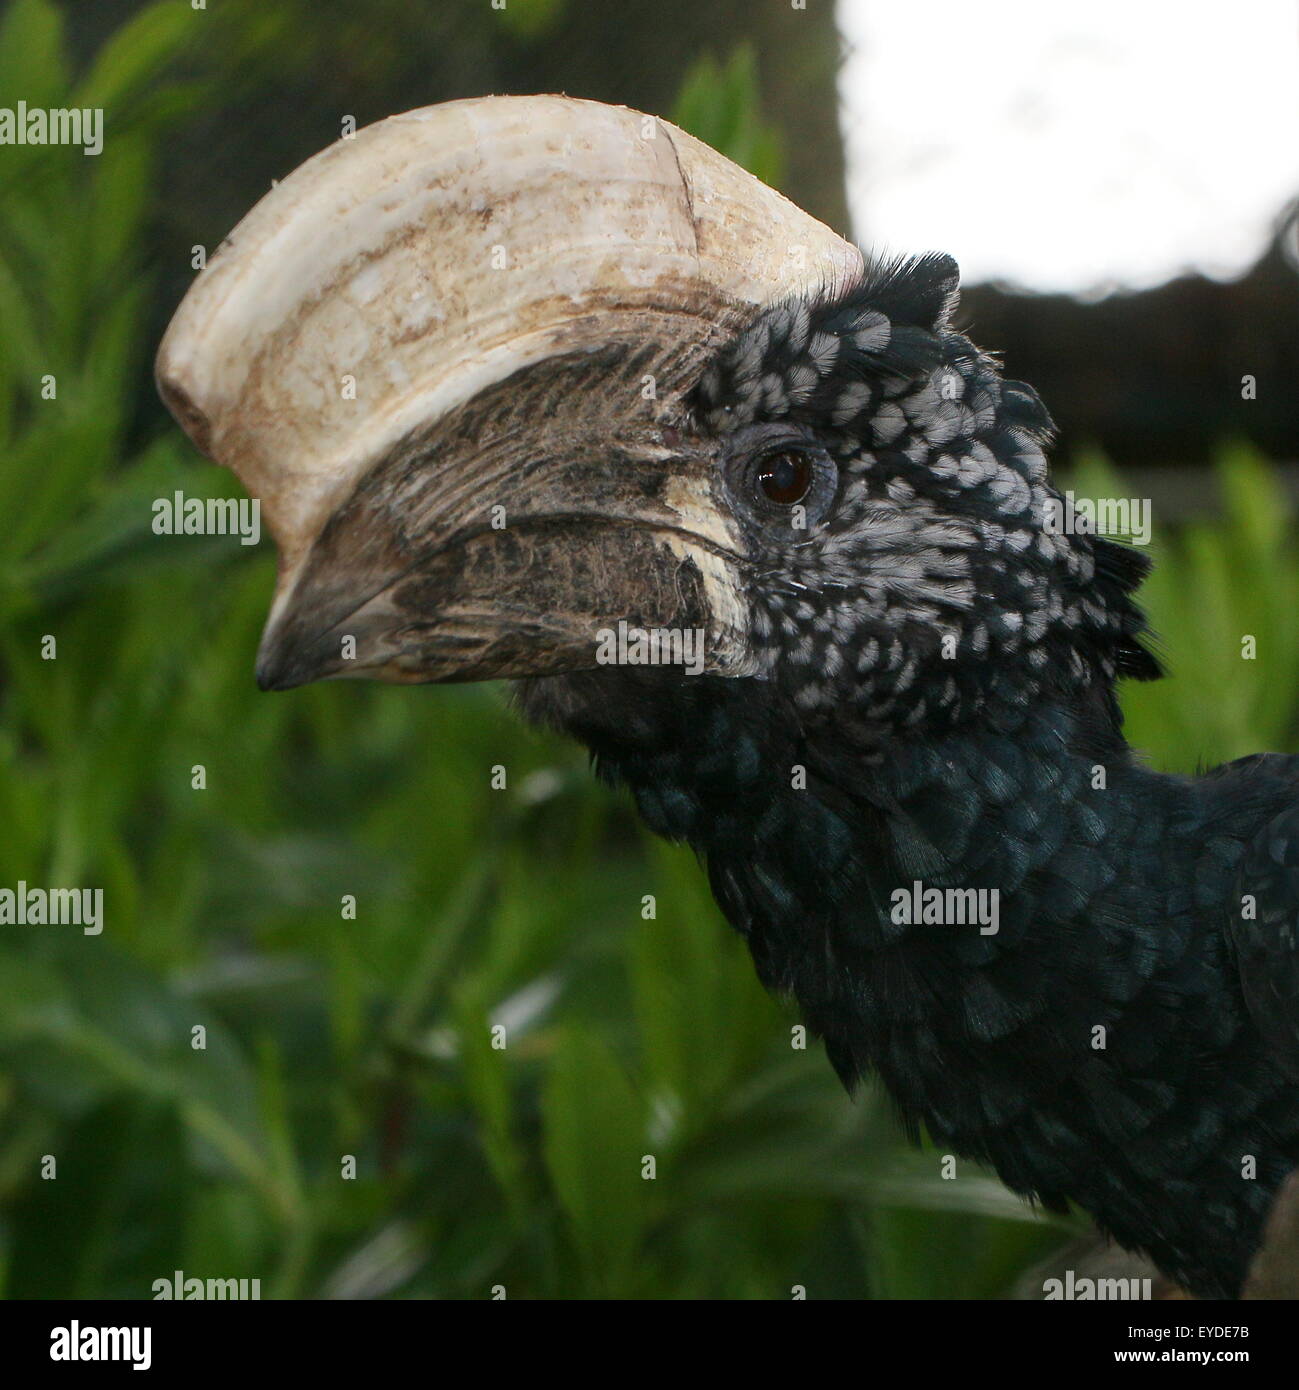 East African Silvery Cheeked hornbill (Bycanistes brevis, Ceratogymna brevis) Stock Photo